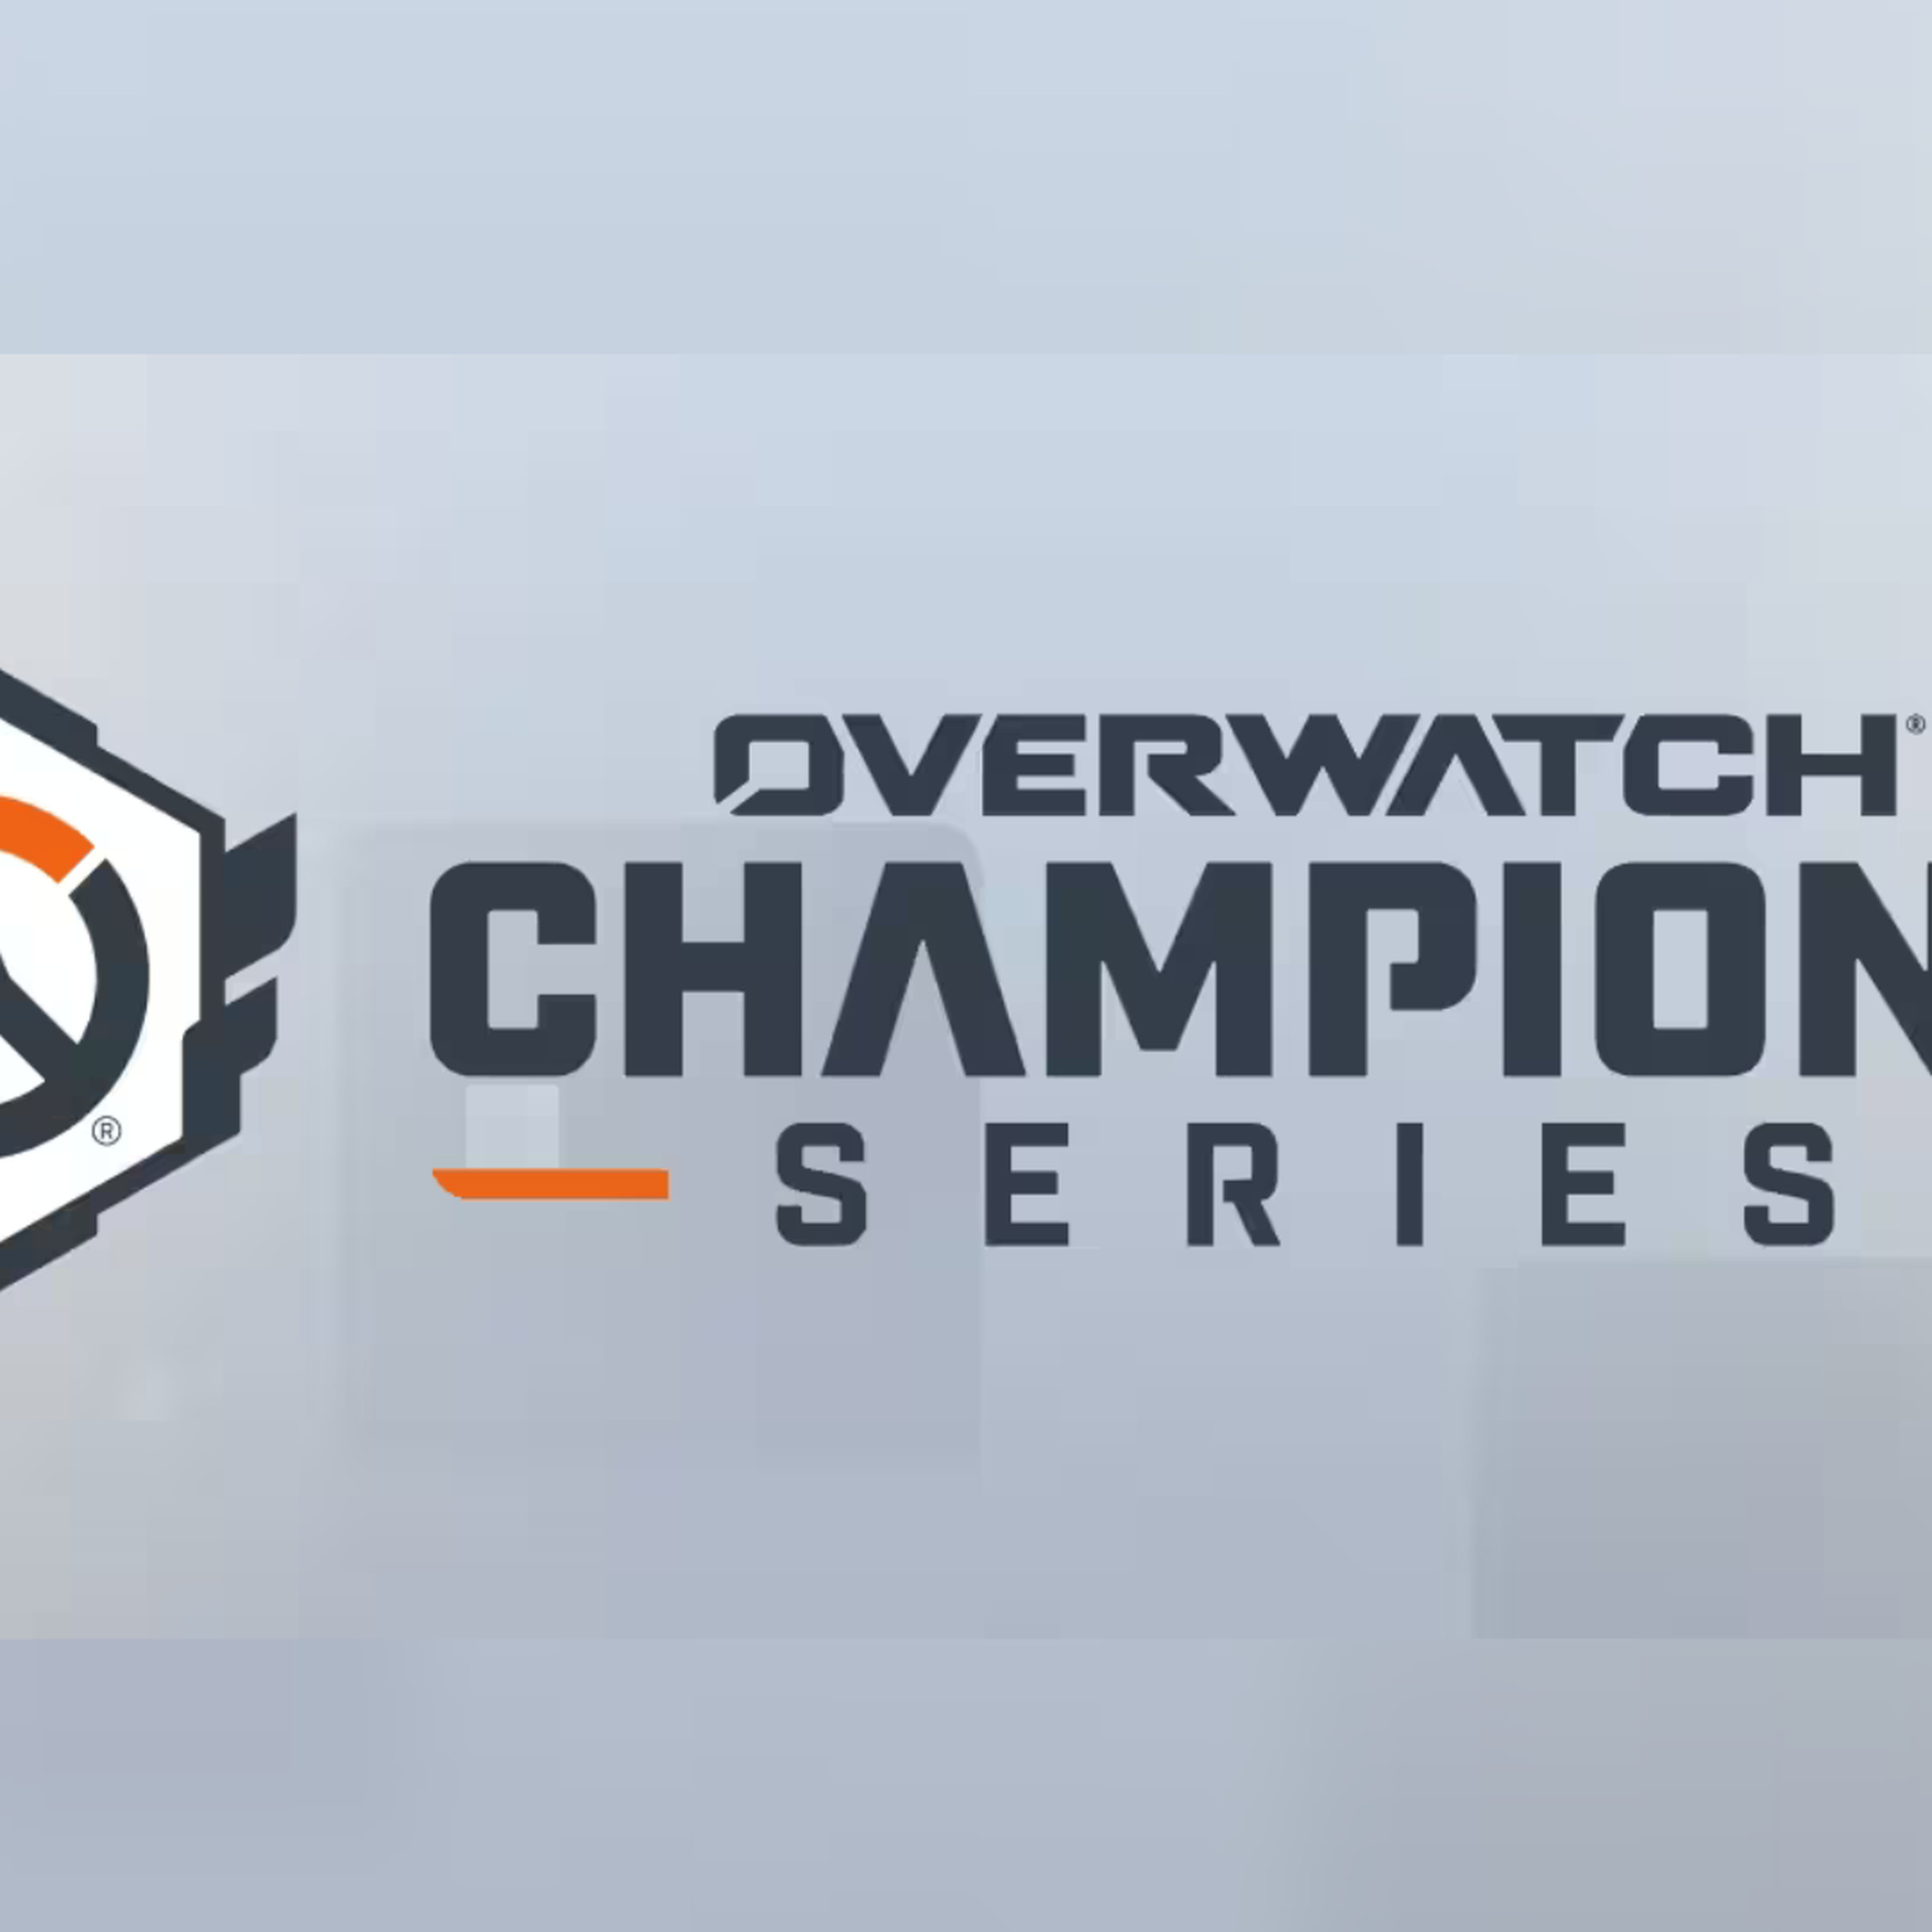 Graphic with text that reads “Overwatch Champions Series”